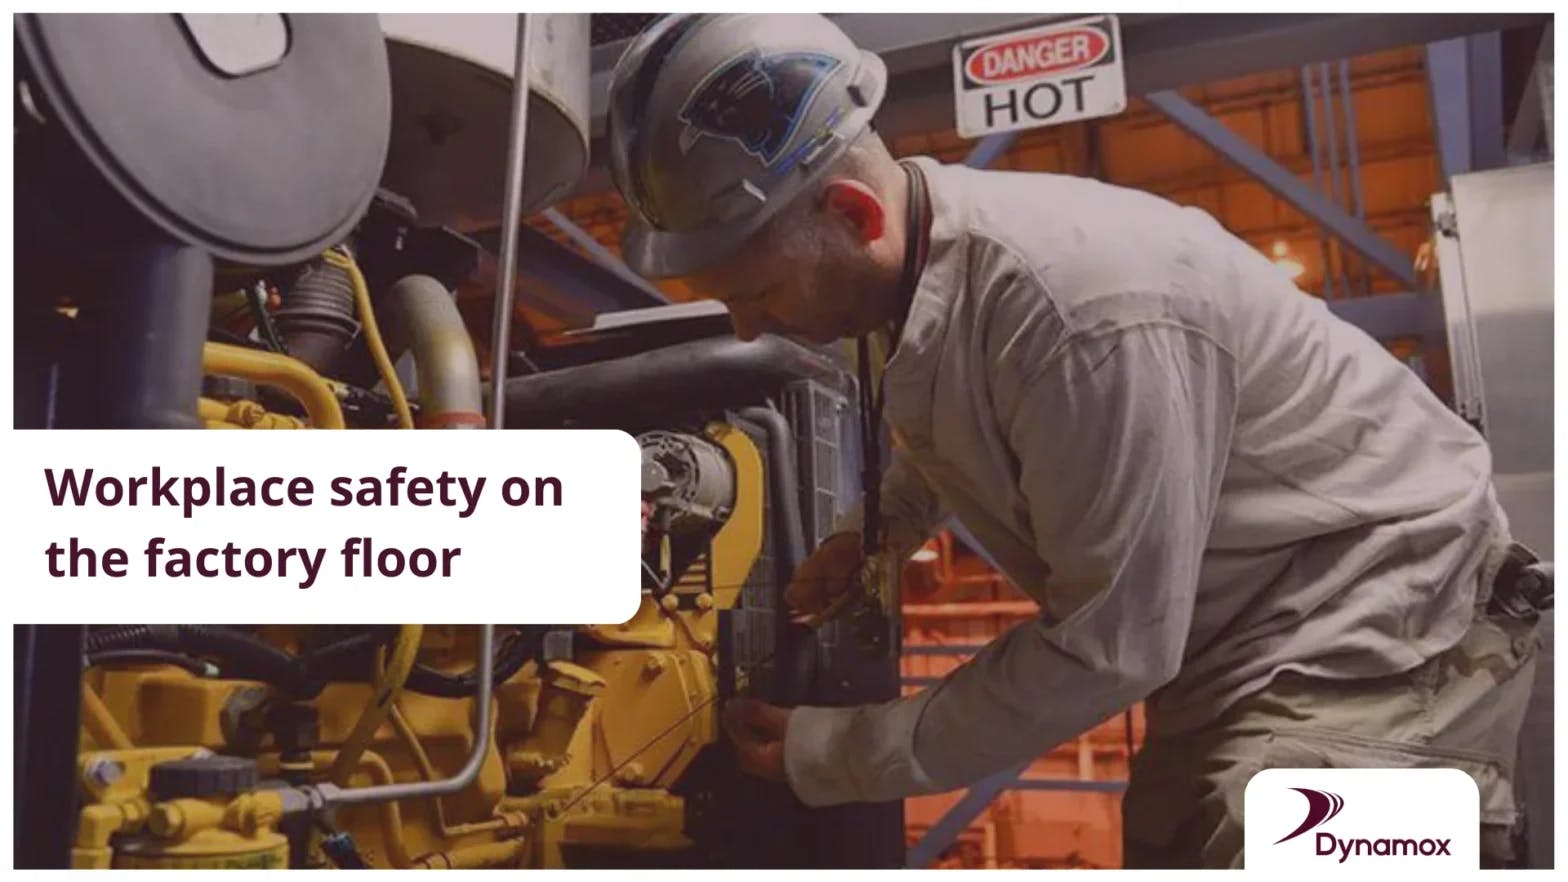 Workplace safety on the factory floor